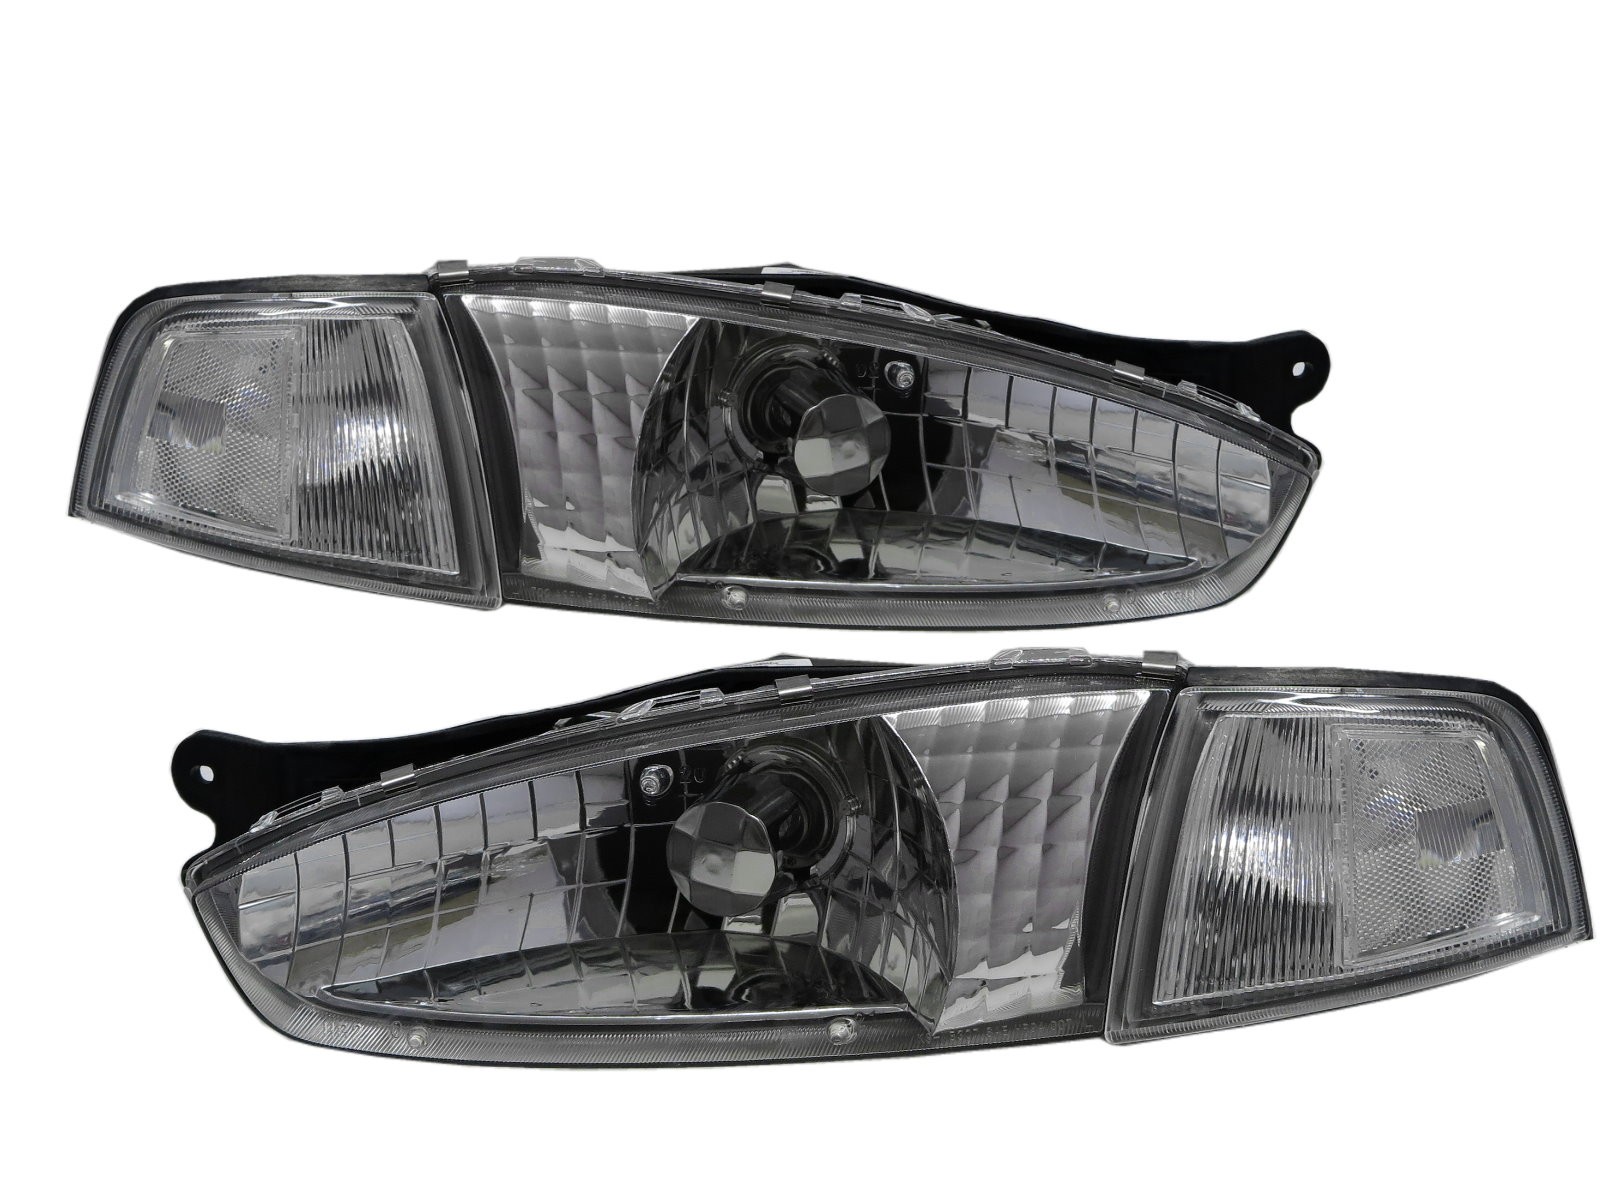 CrazyTheGod Mirage Fifth generation 1995-2003 Hatchback/Coupe 2D/3D Clear Headlight Headlamp Chrome for Mitsubishi LHD